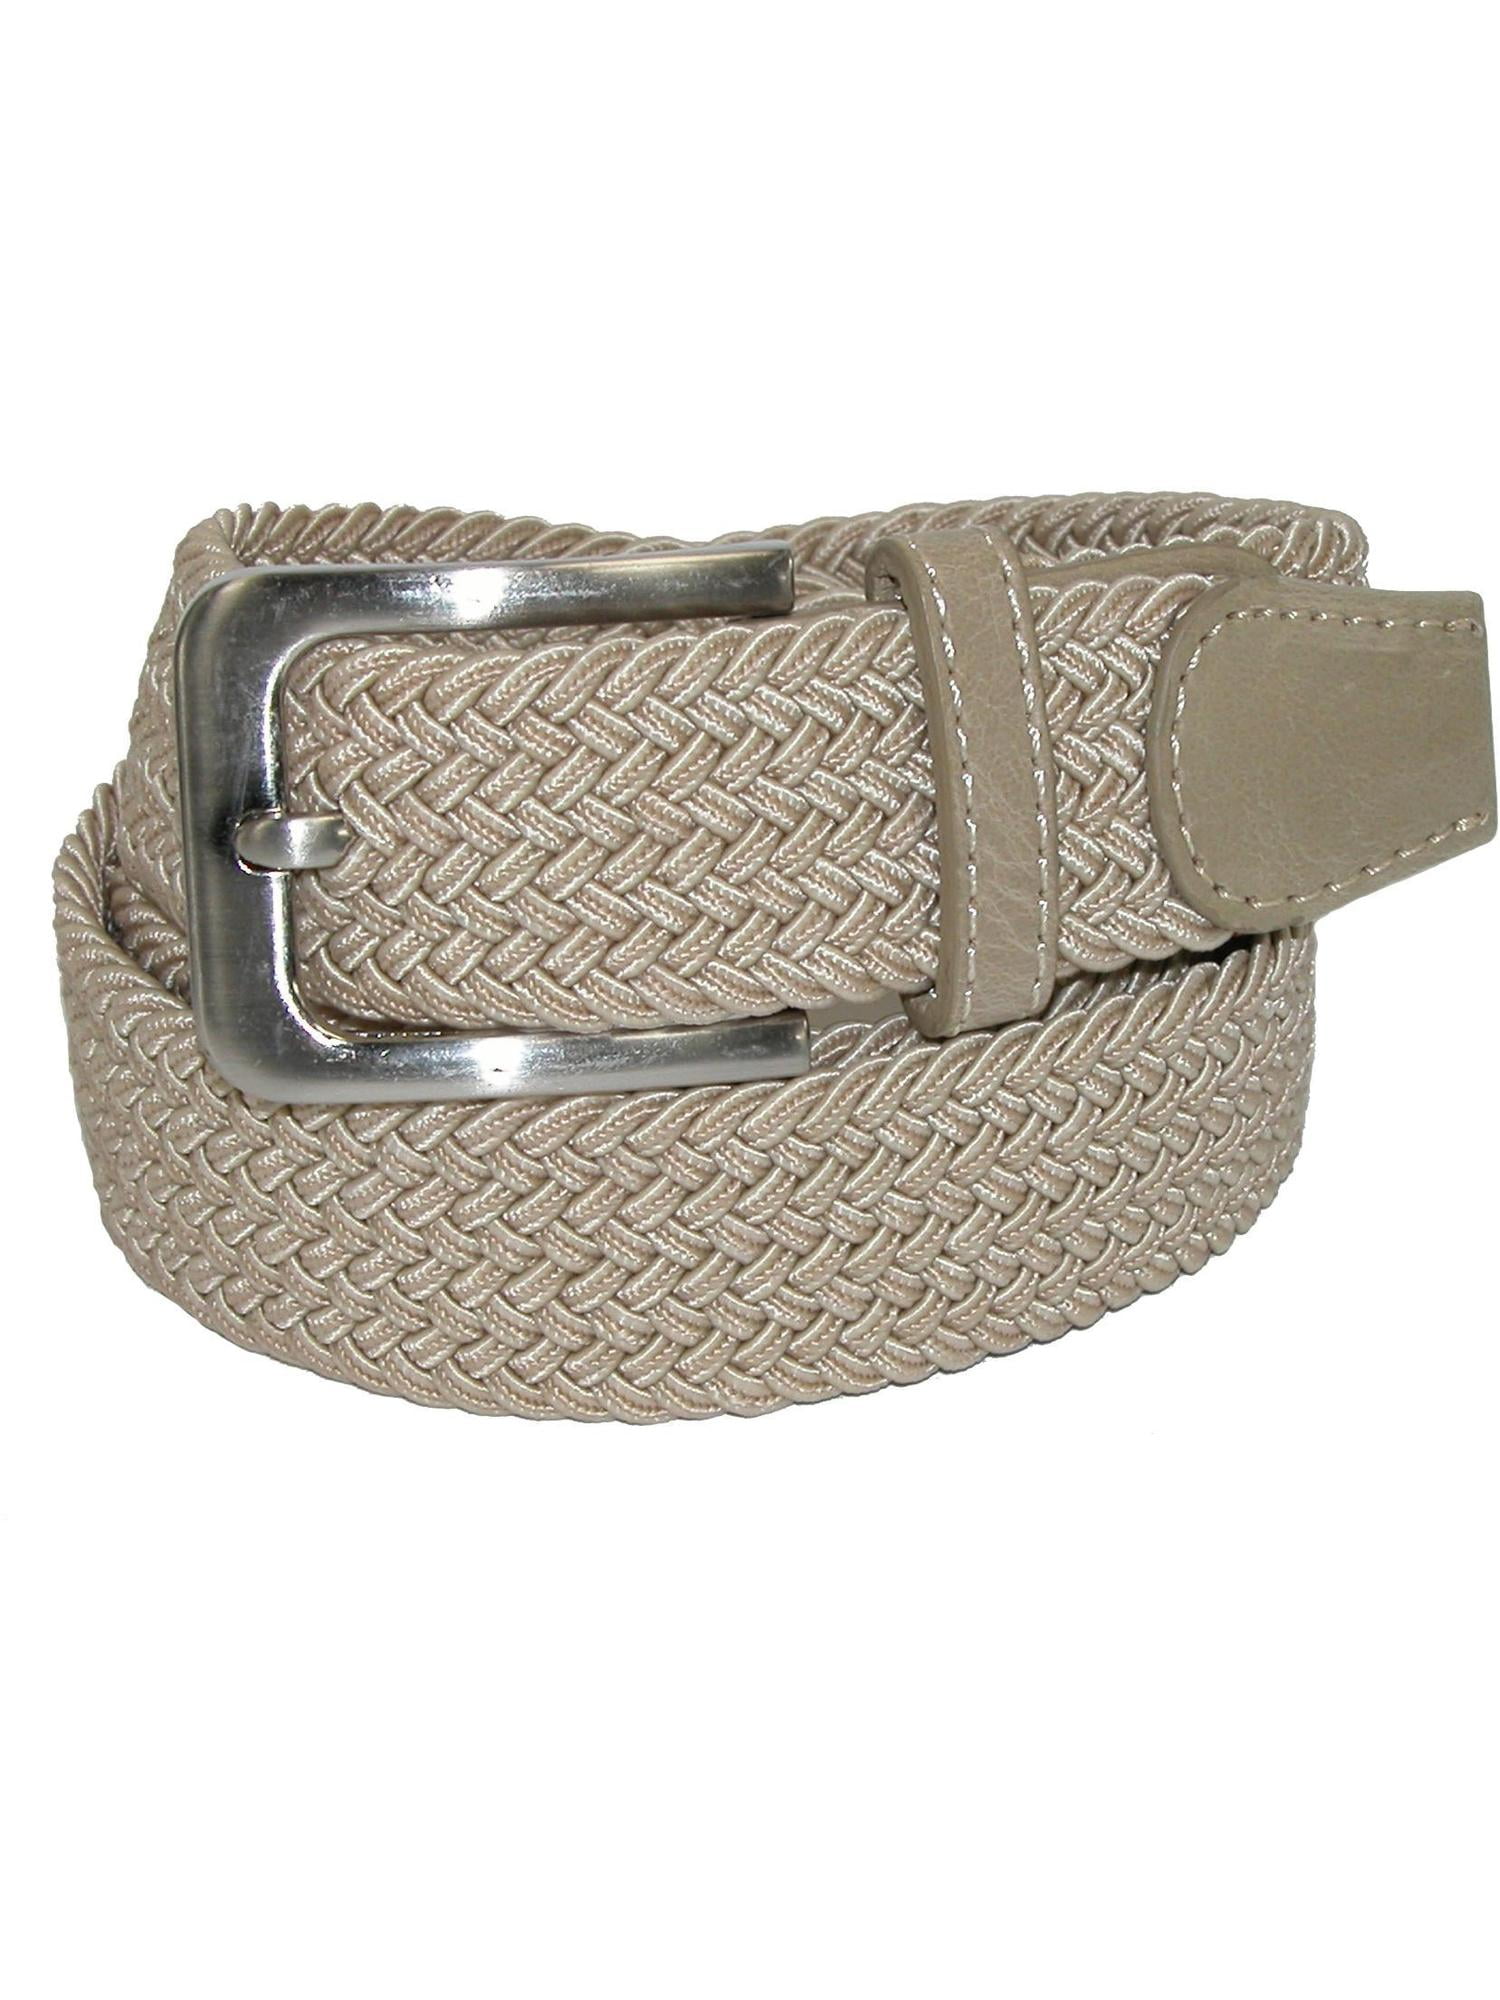 NEW TAN/BEIGE NYLON BRAIDED STRETCH BELT 1.25" WIDE & SIZES TO FIT MOST 400 